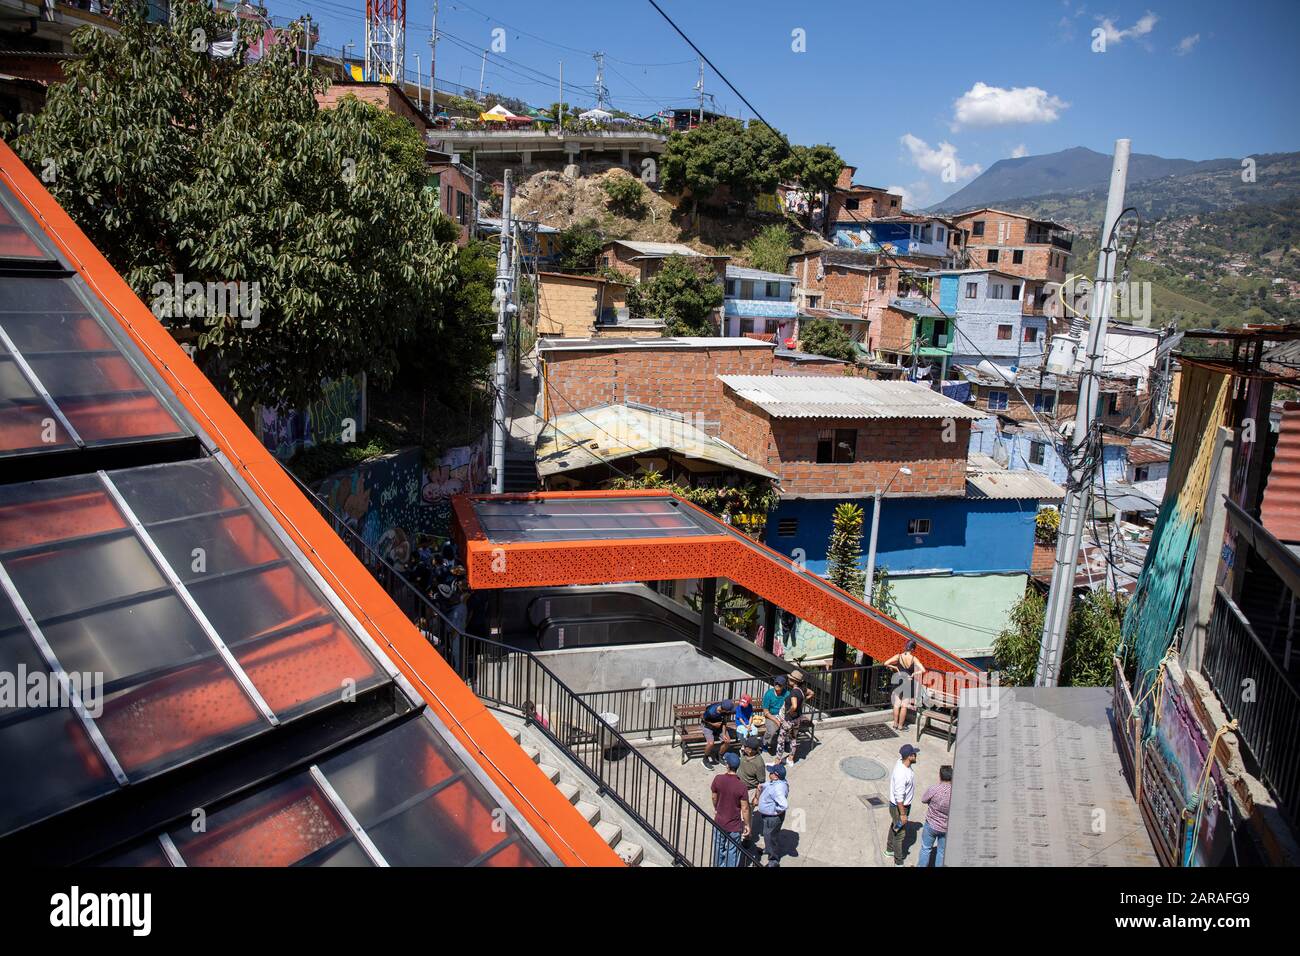 Medellin, Colombia:  Comuna 13 was considered the most dangerous area in Medellin. The escalator project has helped to transform the area. Stock Photo